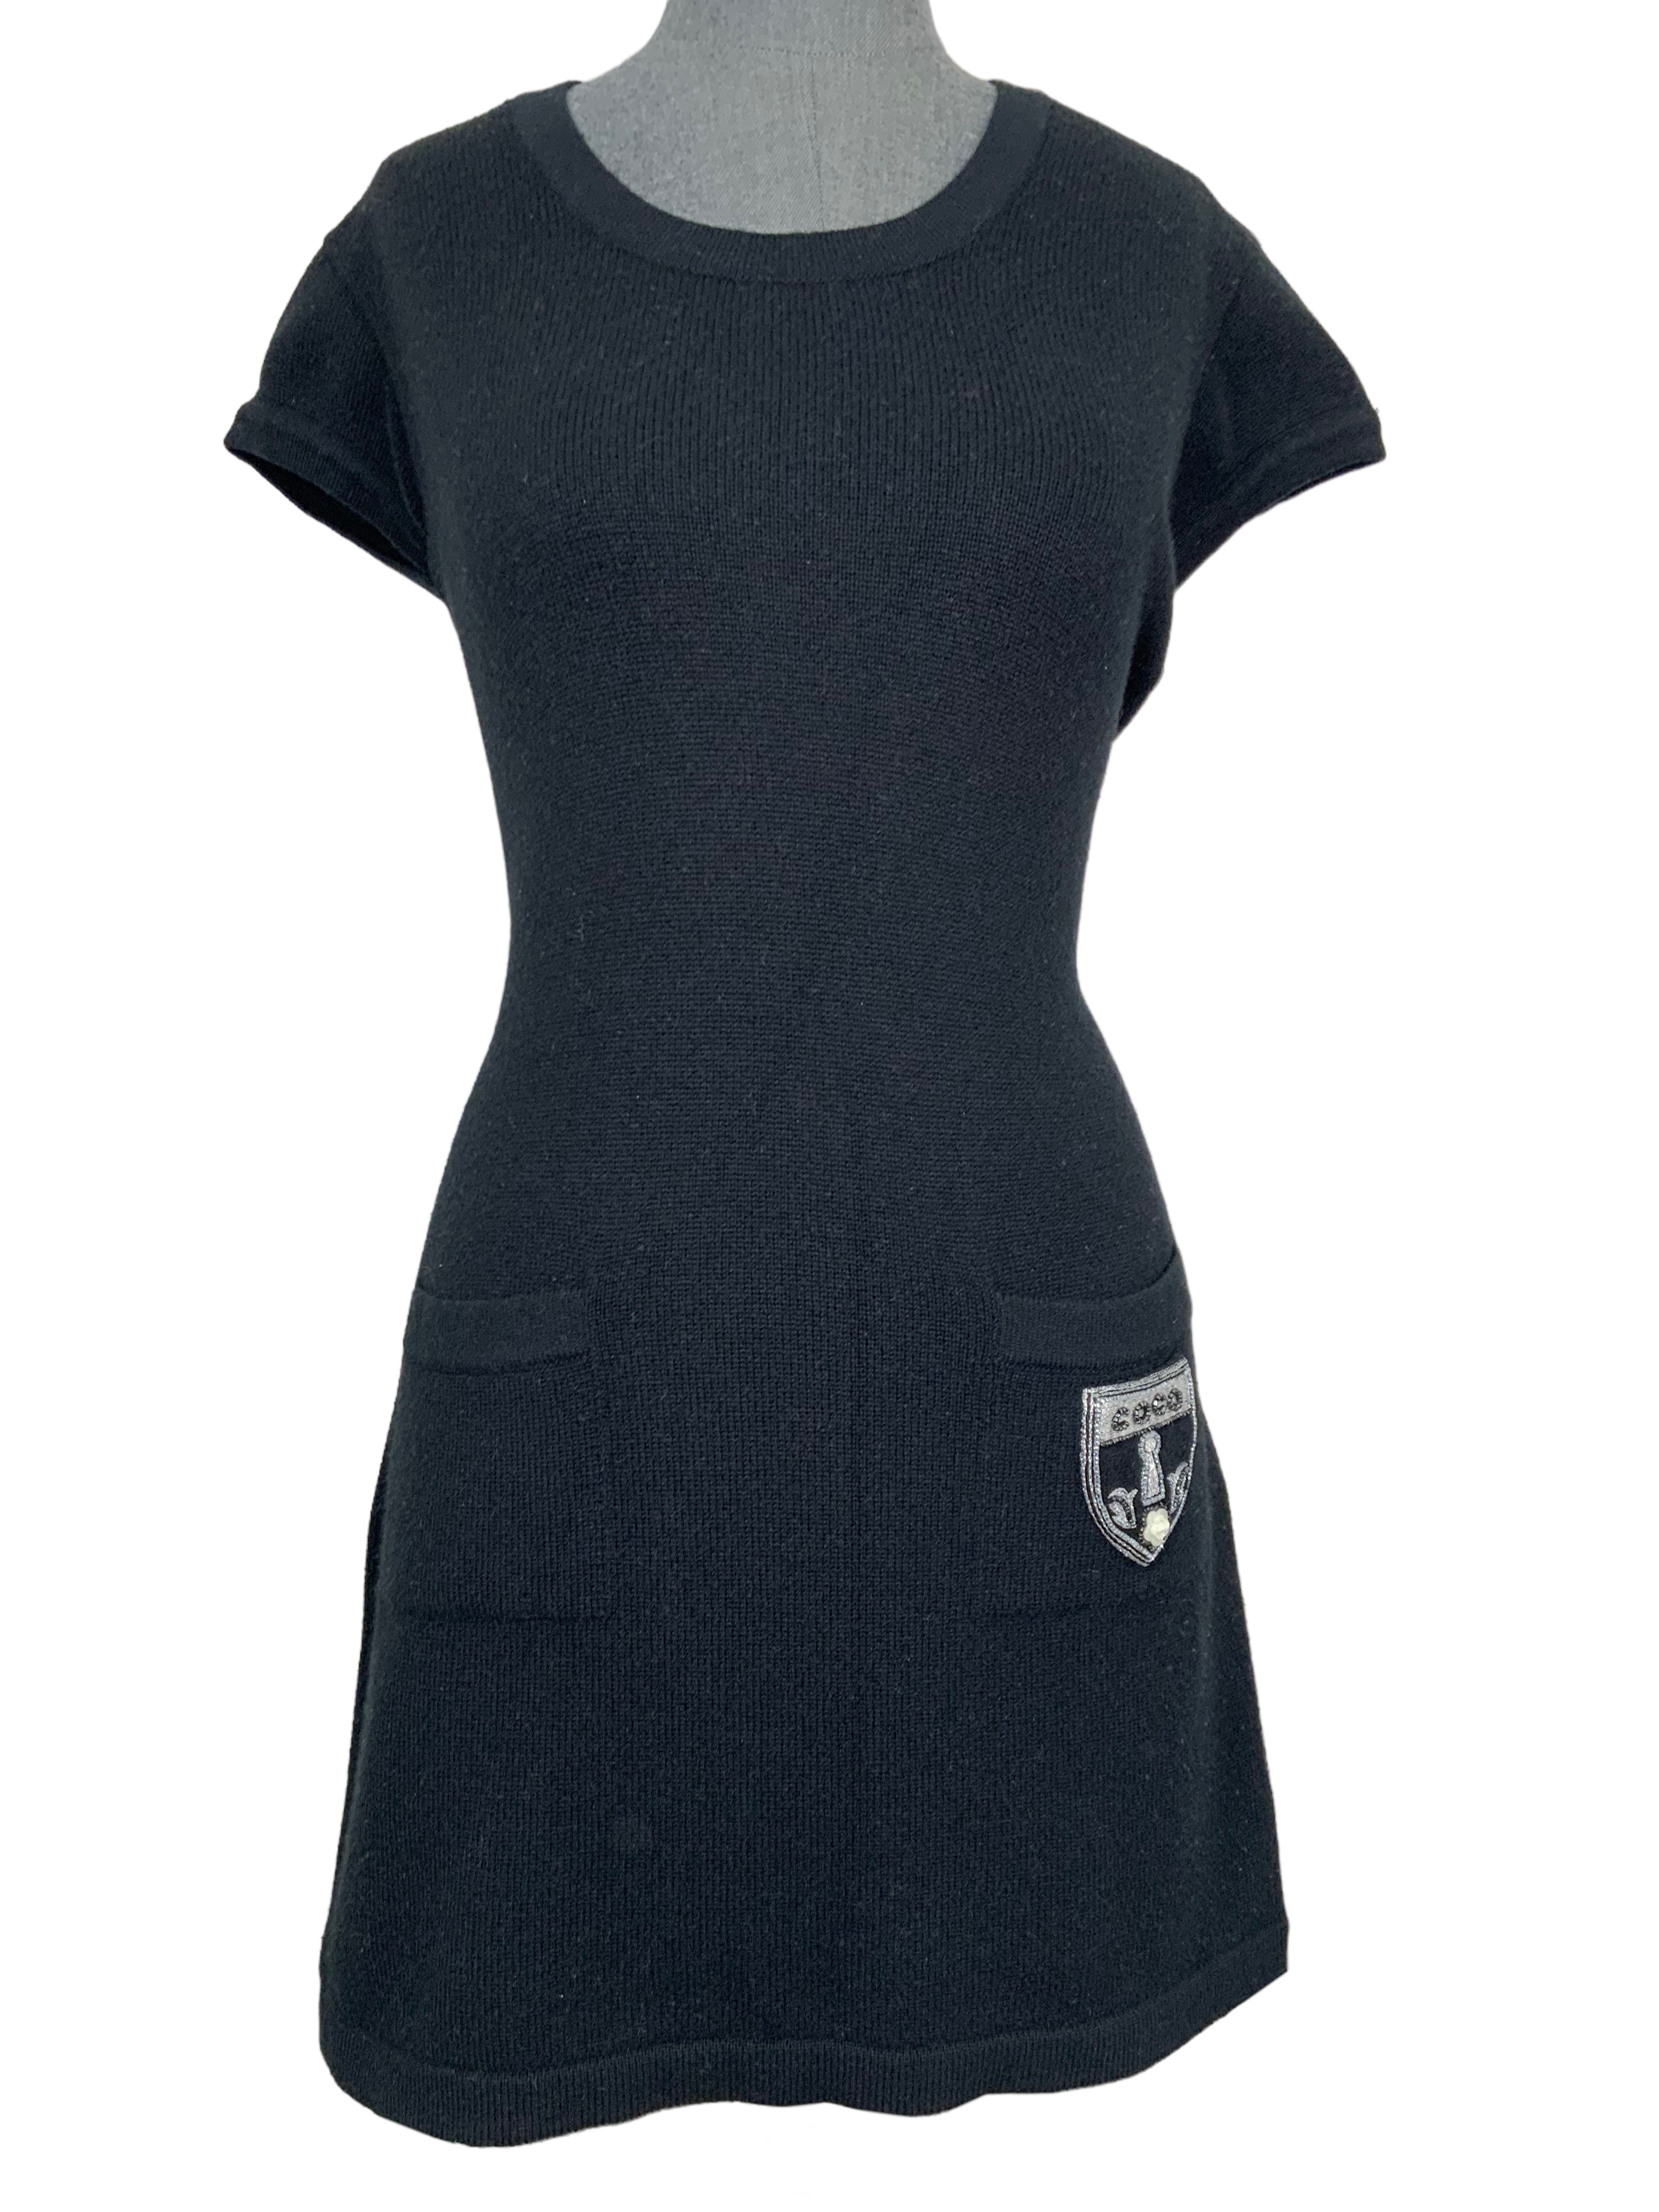 CHANEL 07A Cashmere Short Sleeve COCO Sweater Dress Size M - Consigned  Designs